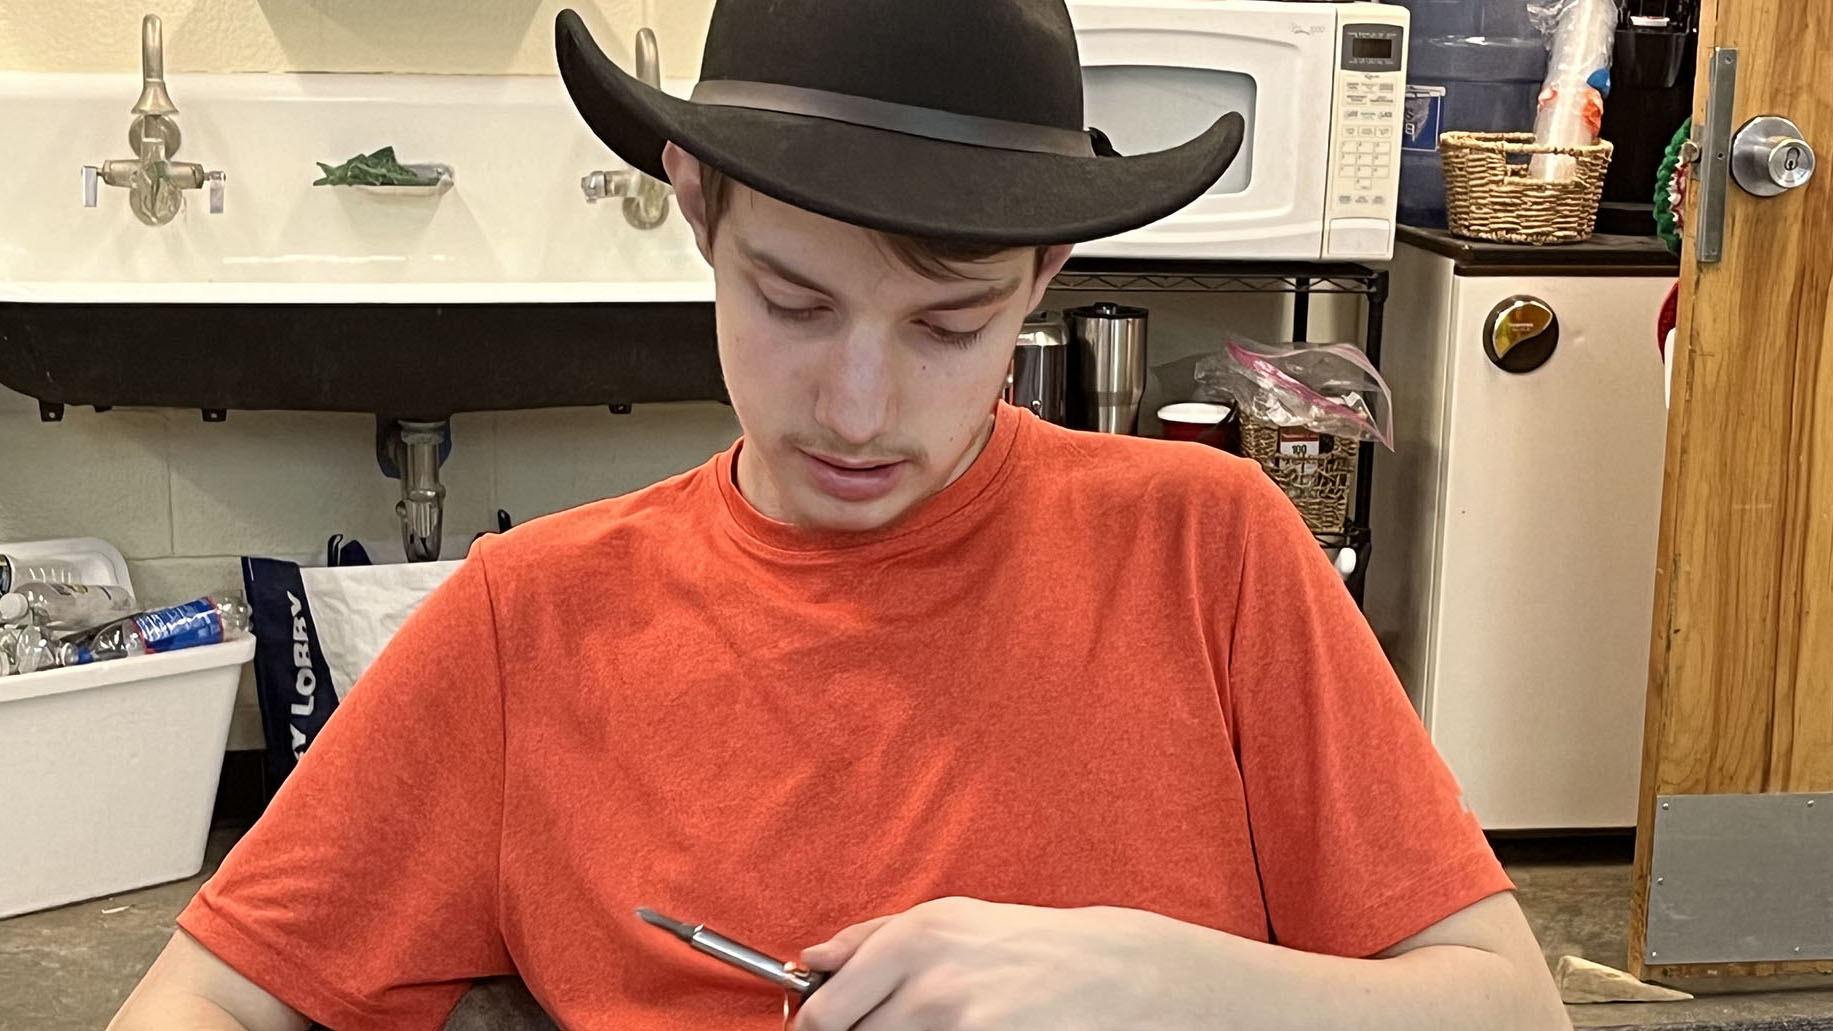 Adult Education students Griffin Boehlke, who is wearing a brown felt cowboy hat and a short-sleeved orange t-shirt, is sitting at a work table, and looking downward while bending wire with a hand tool.